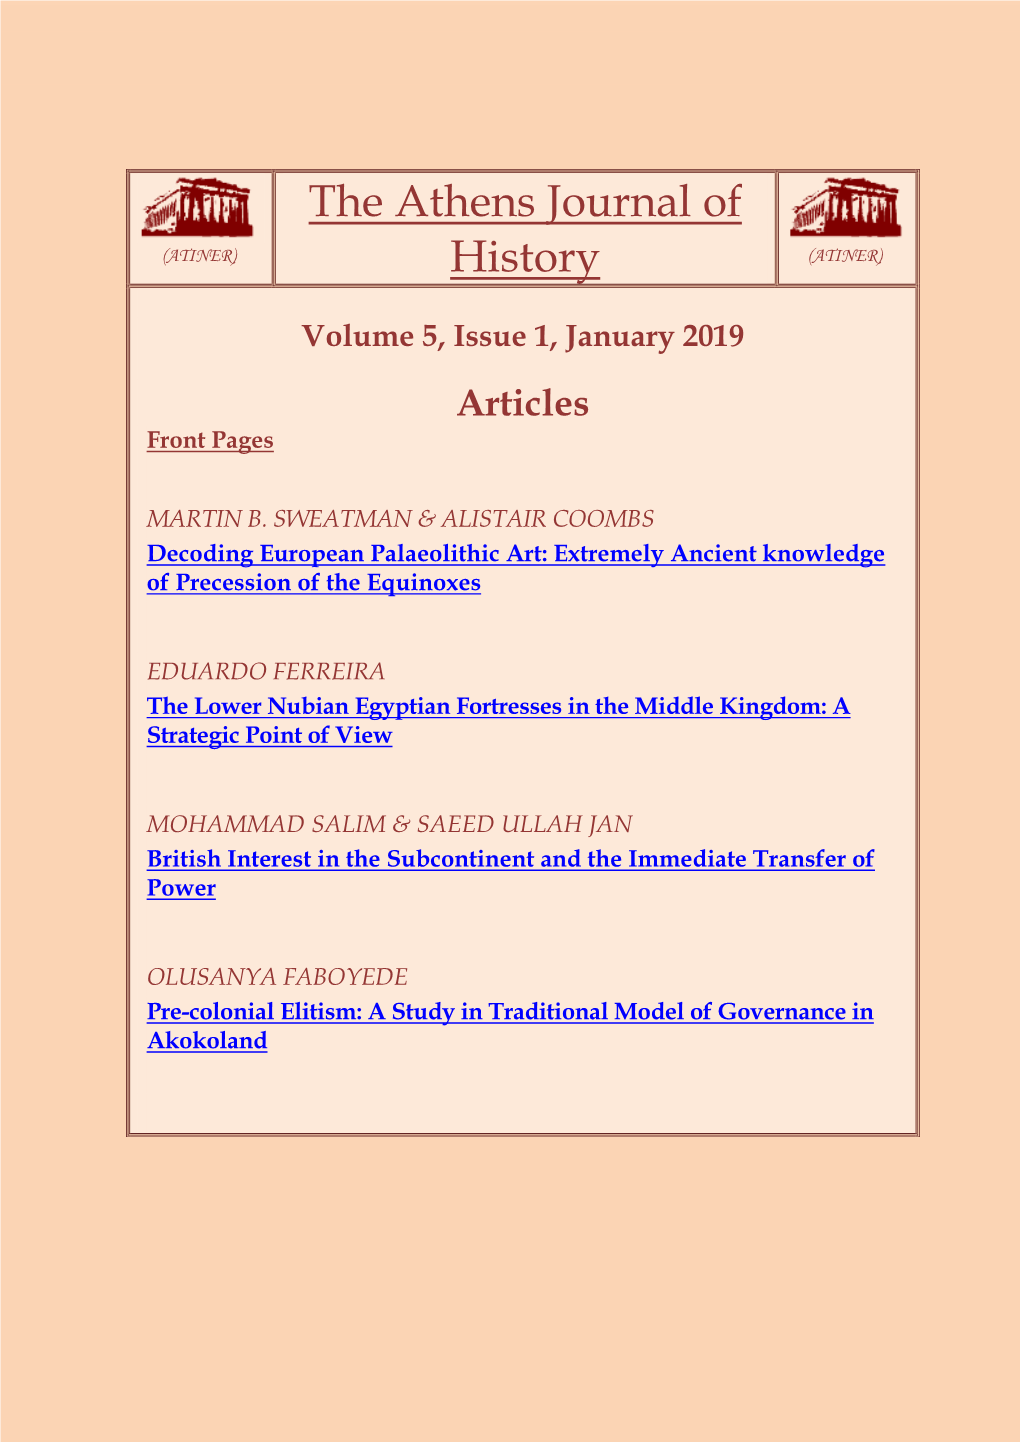 The Athens Journal of History ISSN NUMBER: 2407-9677 - DOI: 10.30958/Ajhis Volume 5, Issue 1, January 2019 Download the Entire Issue (PDF)